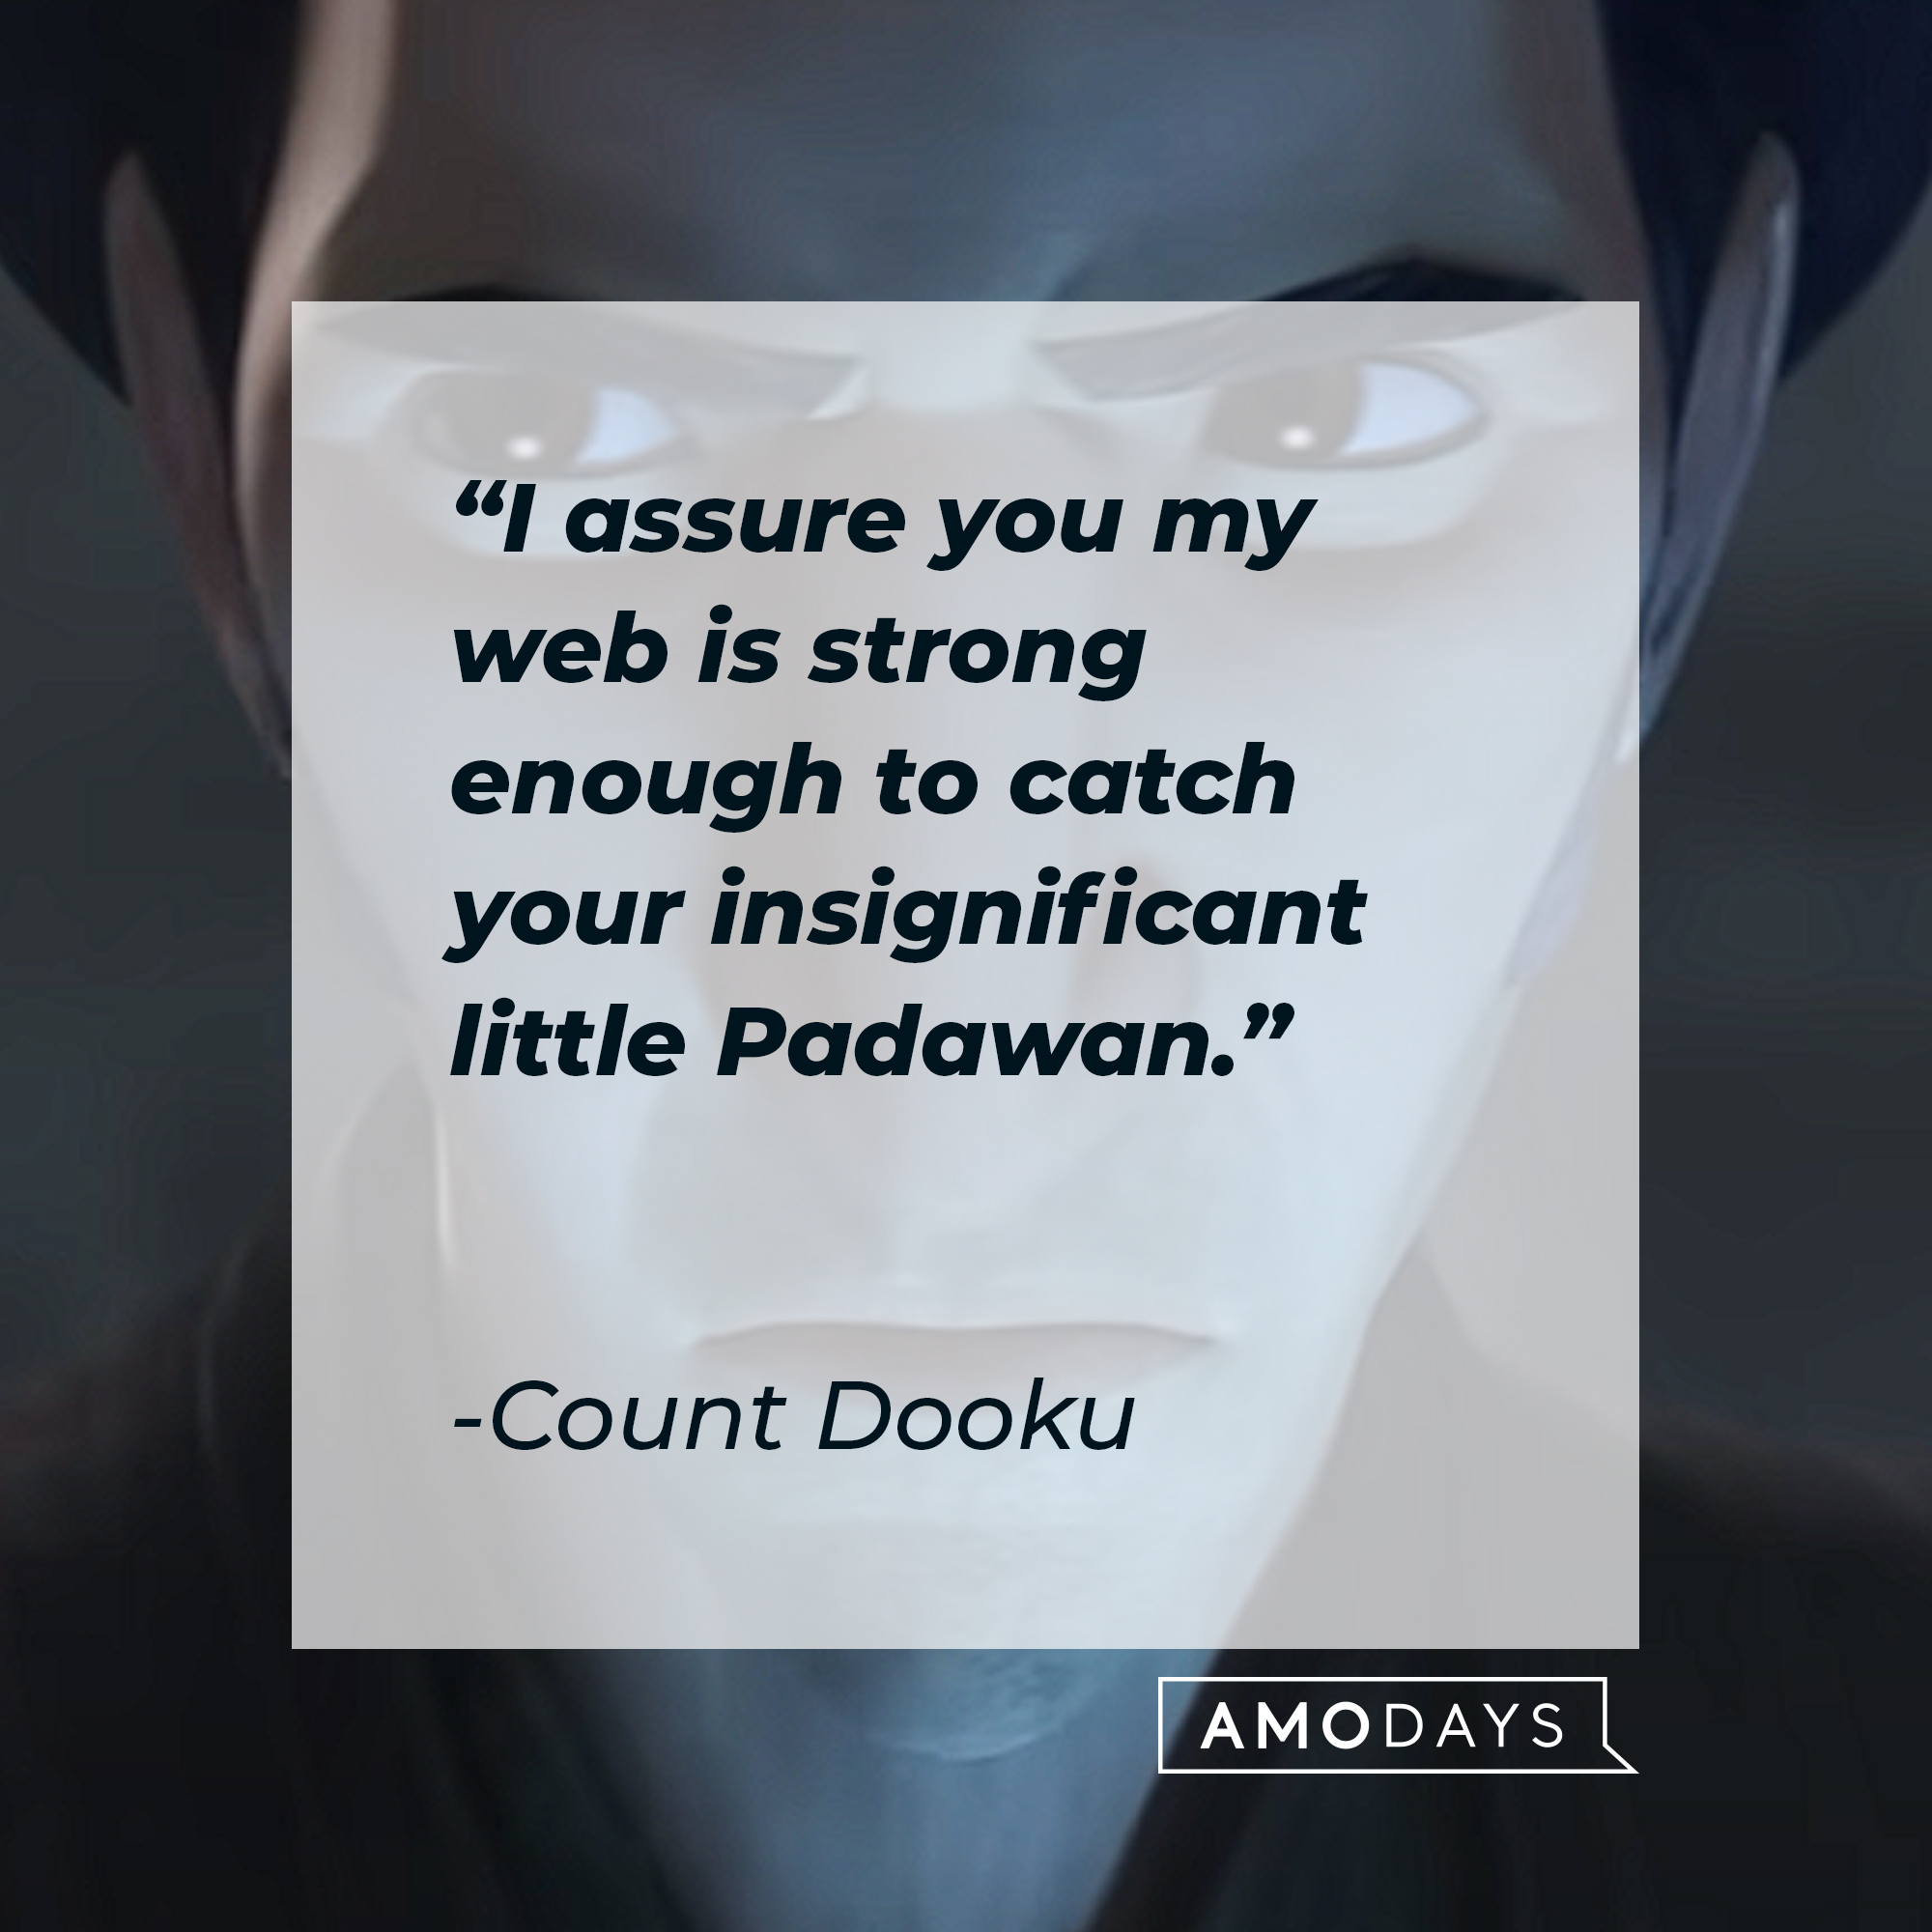 Count Dooku's quote: "I assure you my web is strong enough to catch your insignificant little Padawan." | Source: youtube.com/StarWars